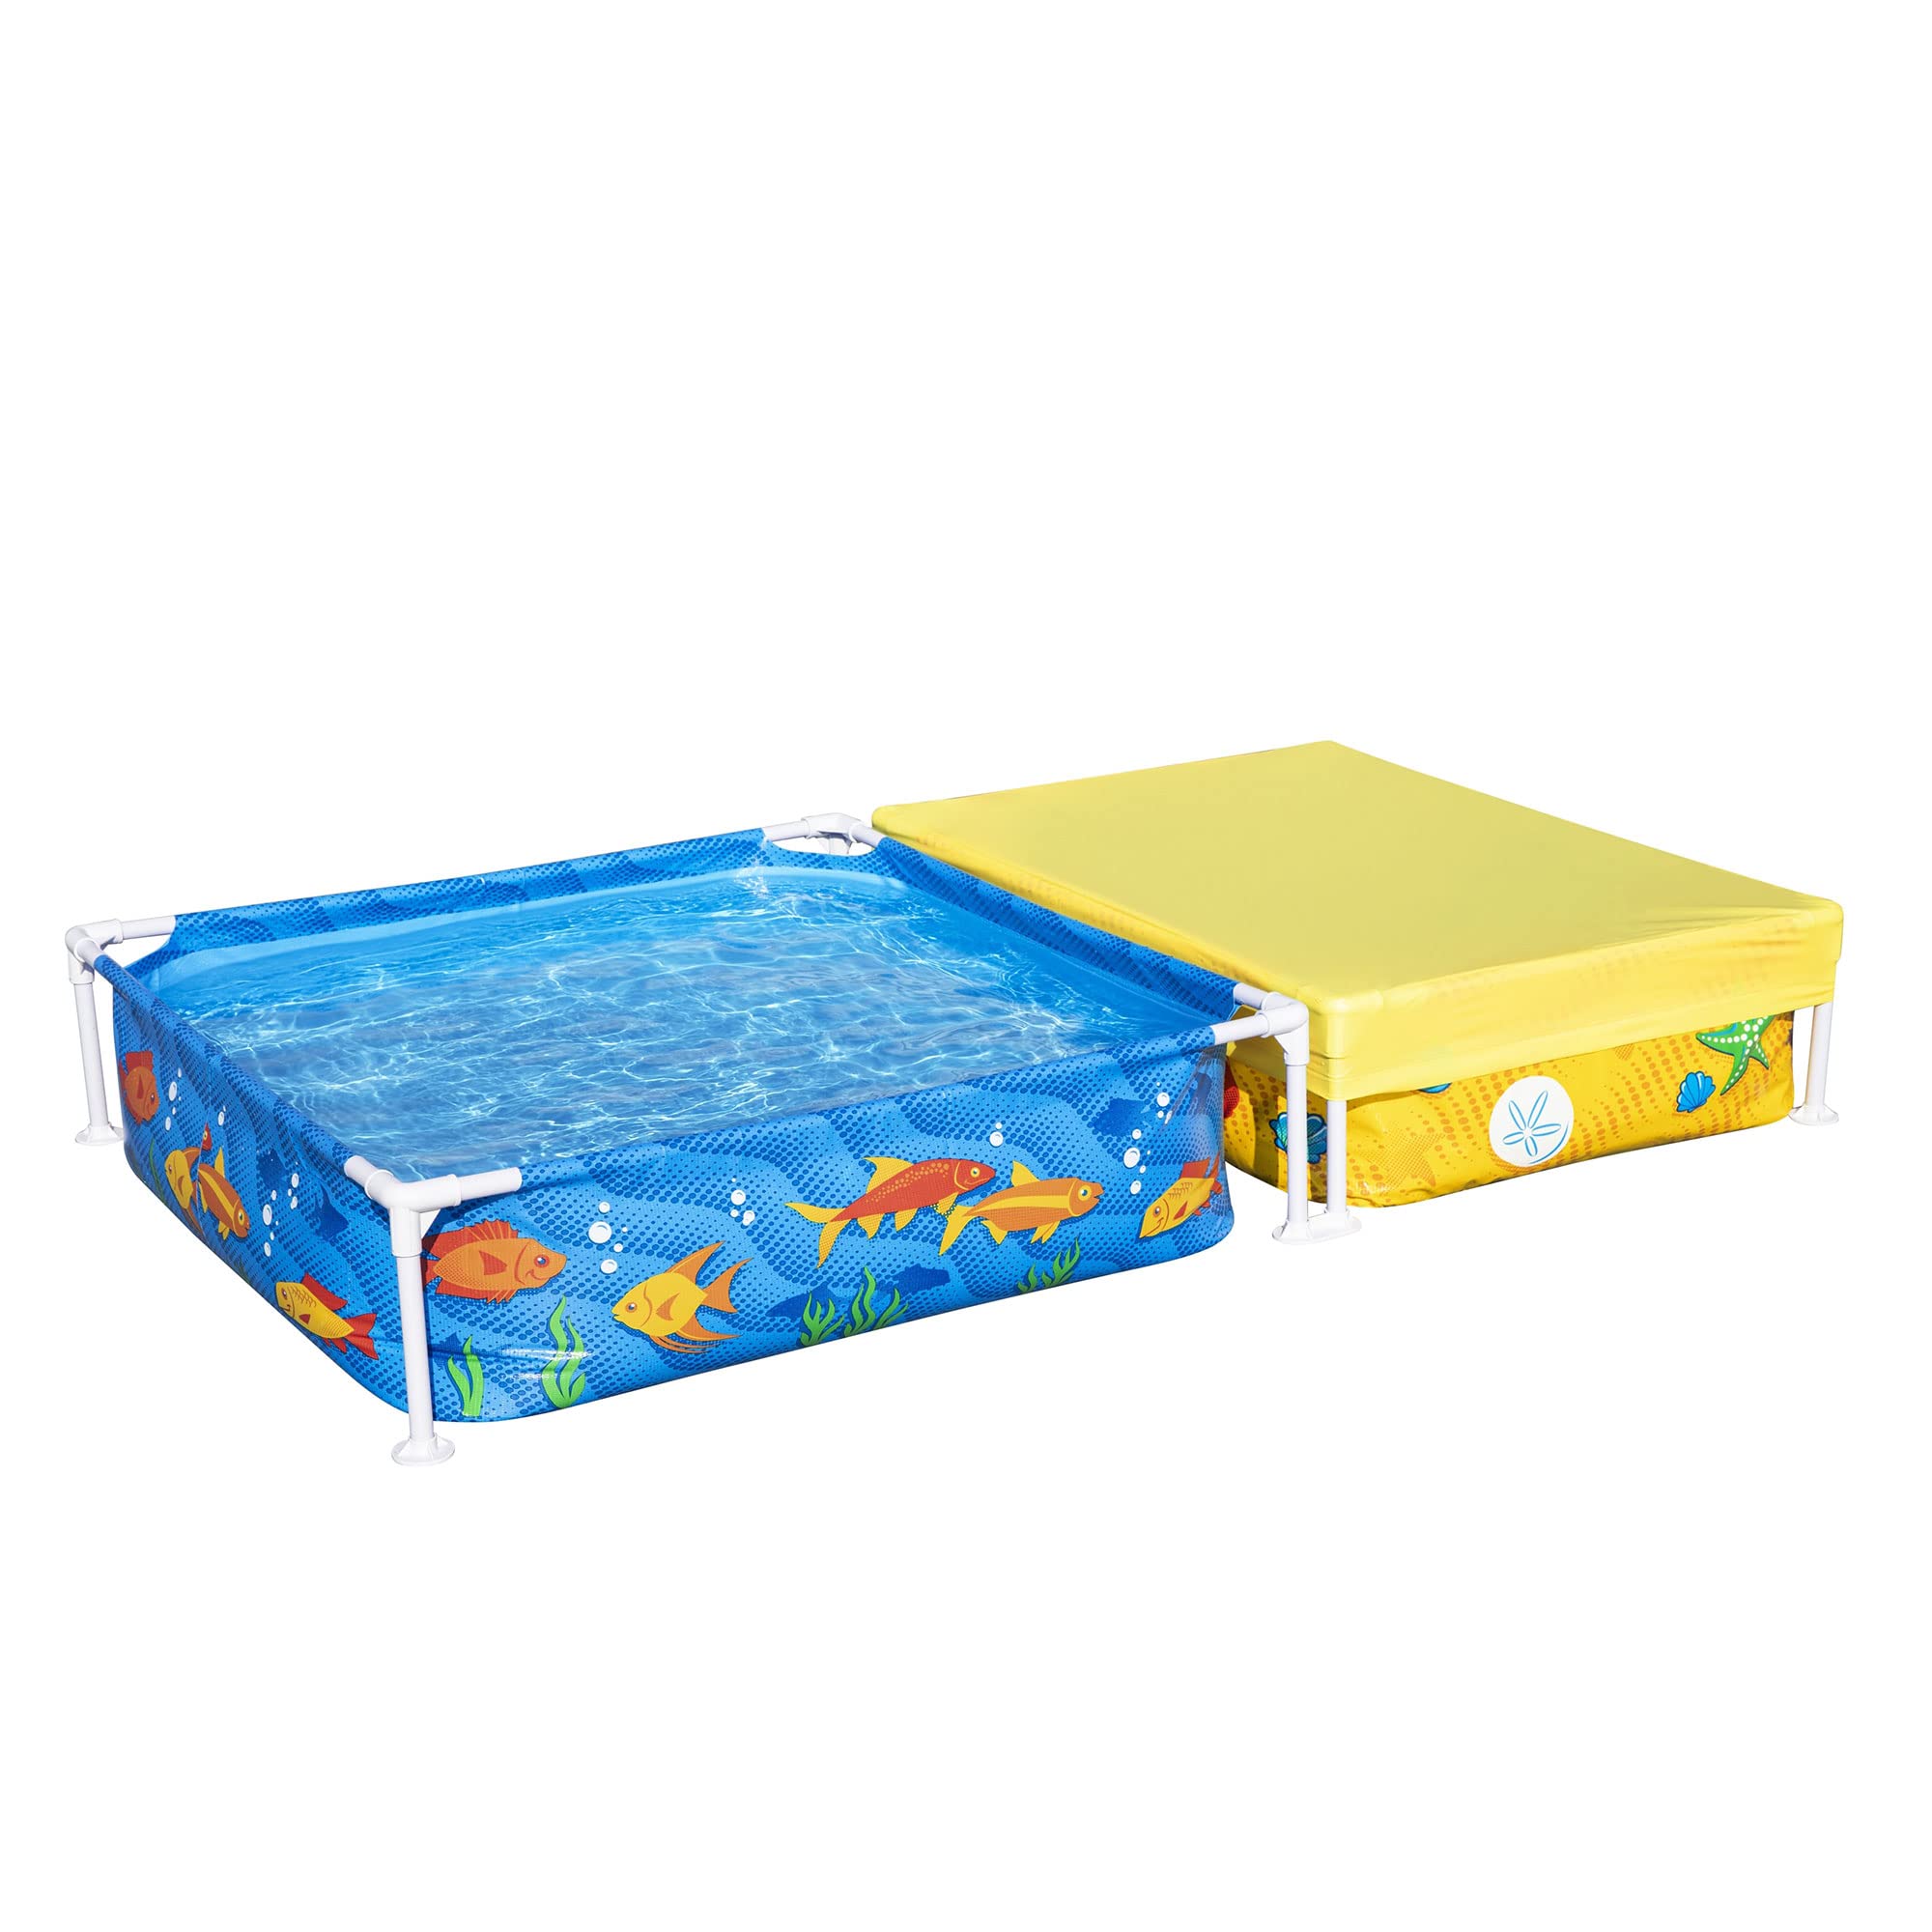 H2OGO! Above Ground Pool & Sandpit Kids Play Center Combo (7' x 48") $28.30 + Free Shipping w/ Prime or on $35+